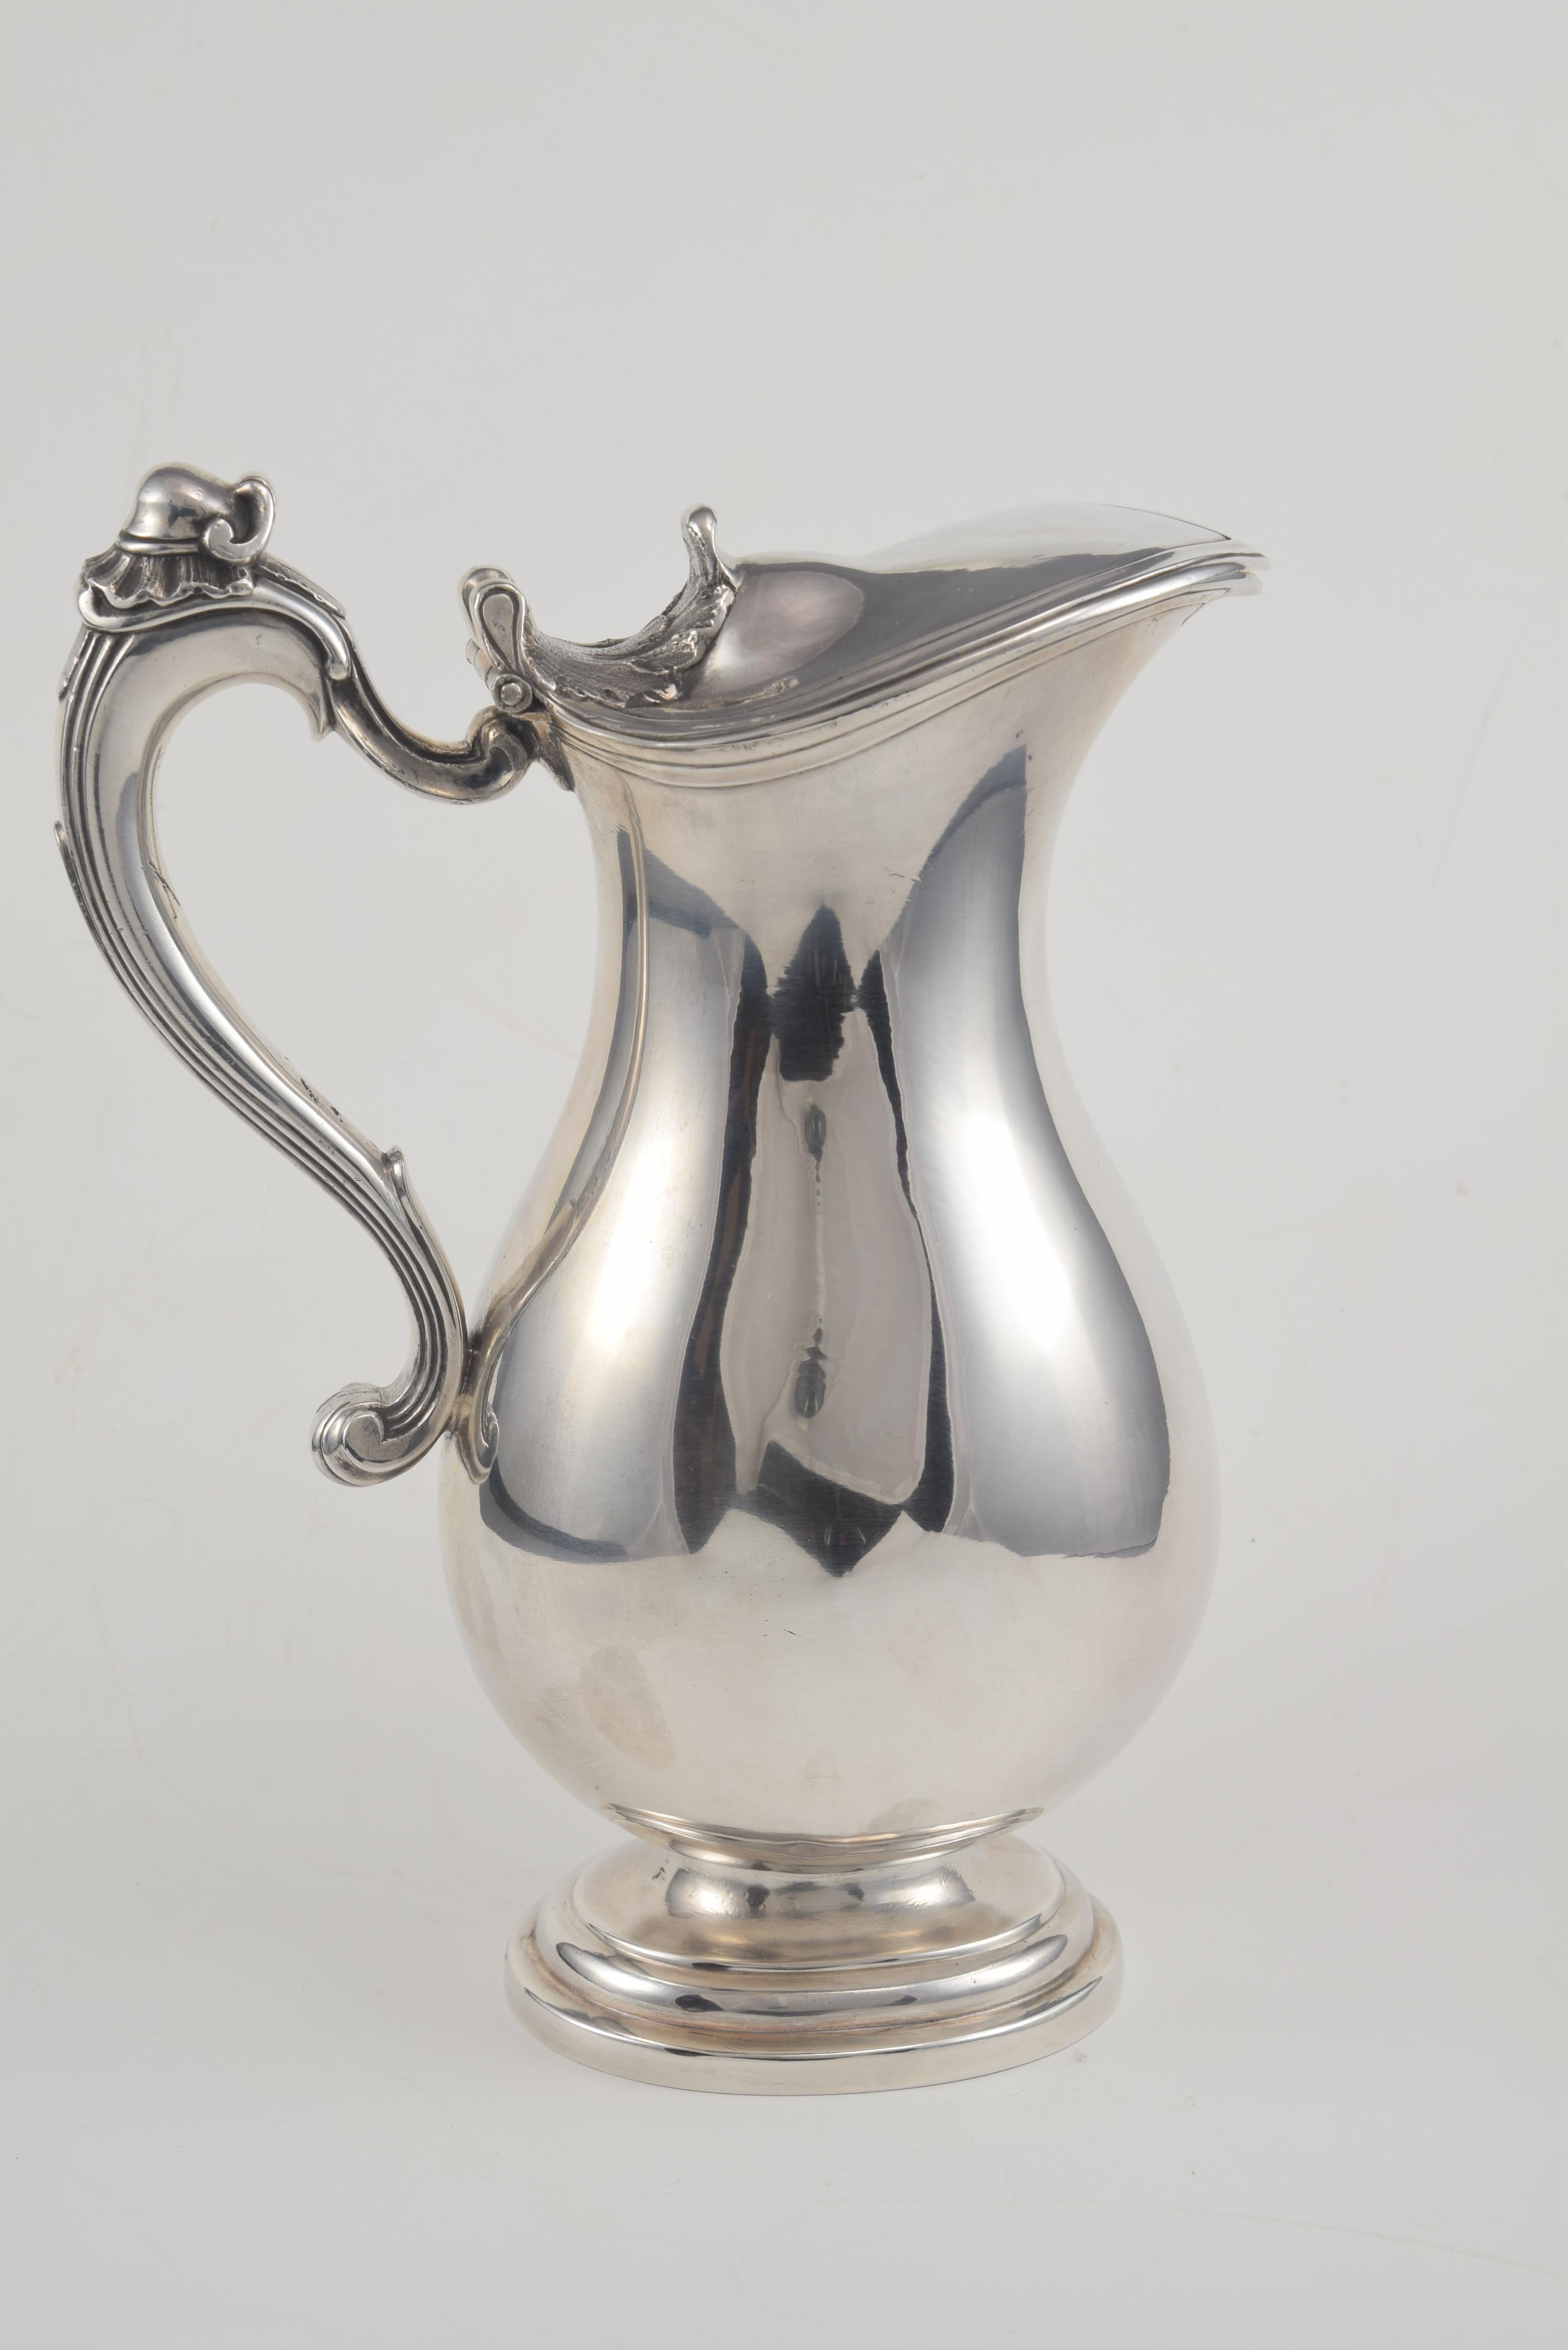 Jug. Silver. Madrid, 1790. With contrast marks.
Silver jug in its color that features an oval base with staggering based on smooth moldings; smooth tear shaped body, with a somewhat pronounced beak and enhanced with engraved lines; hinged lid and